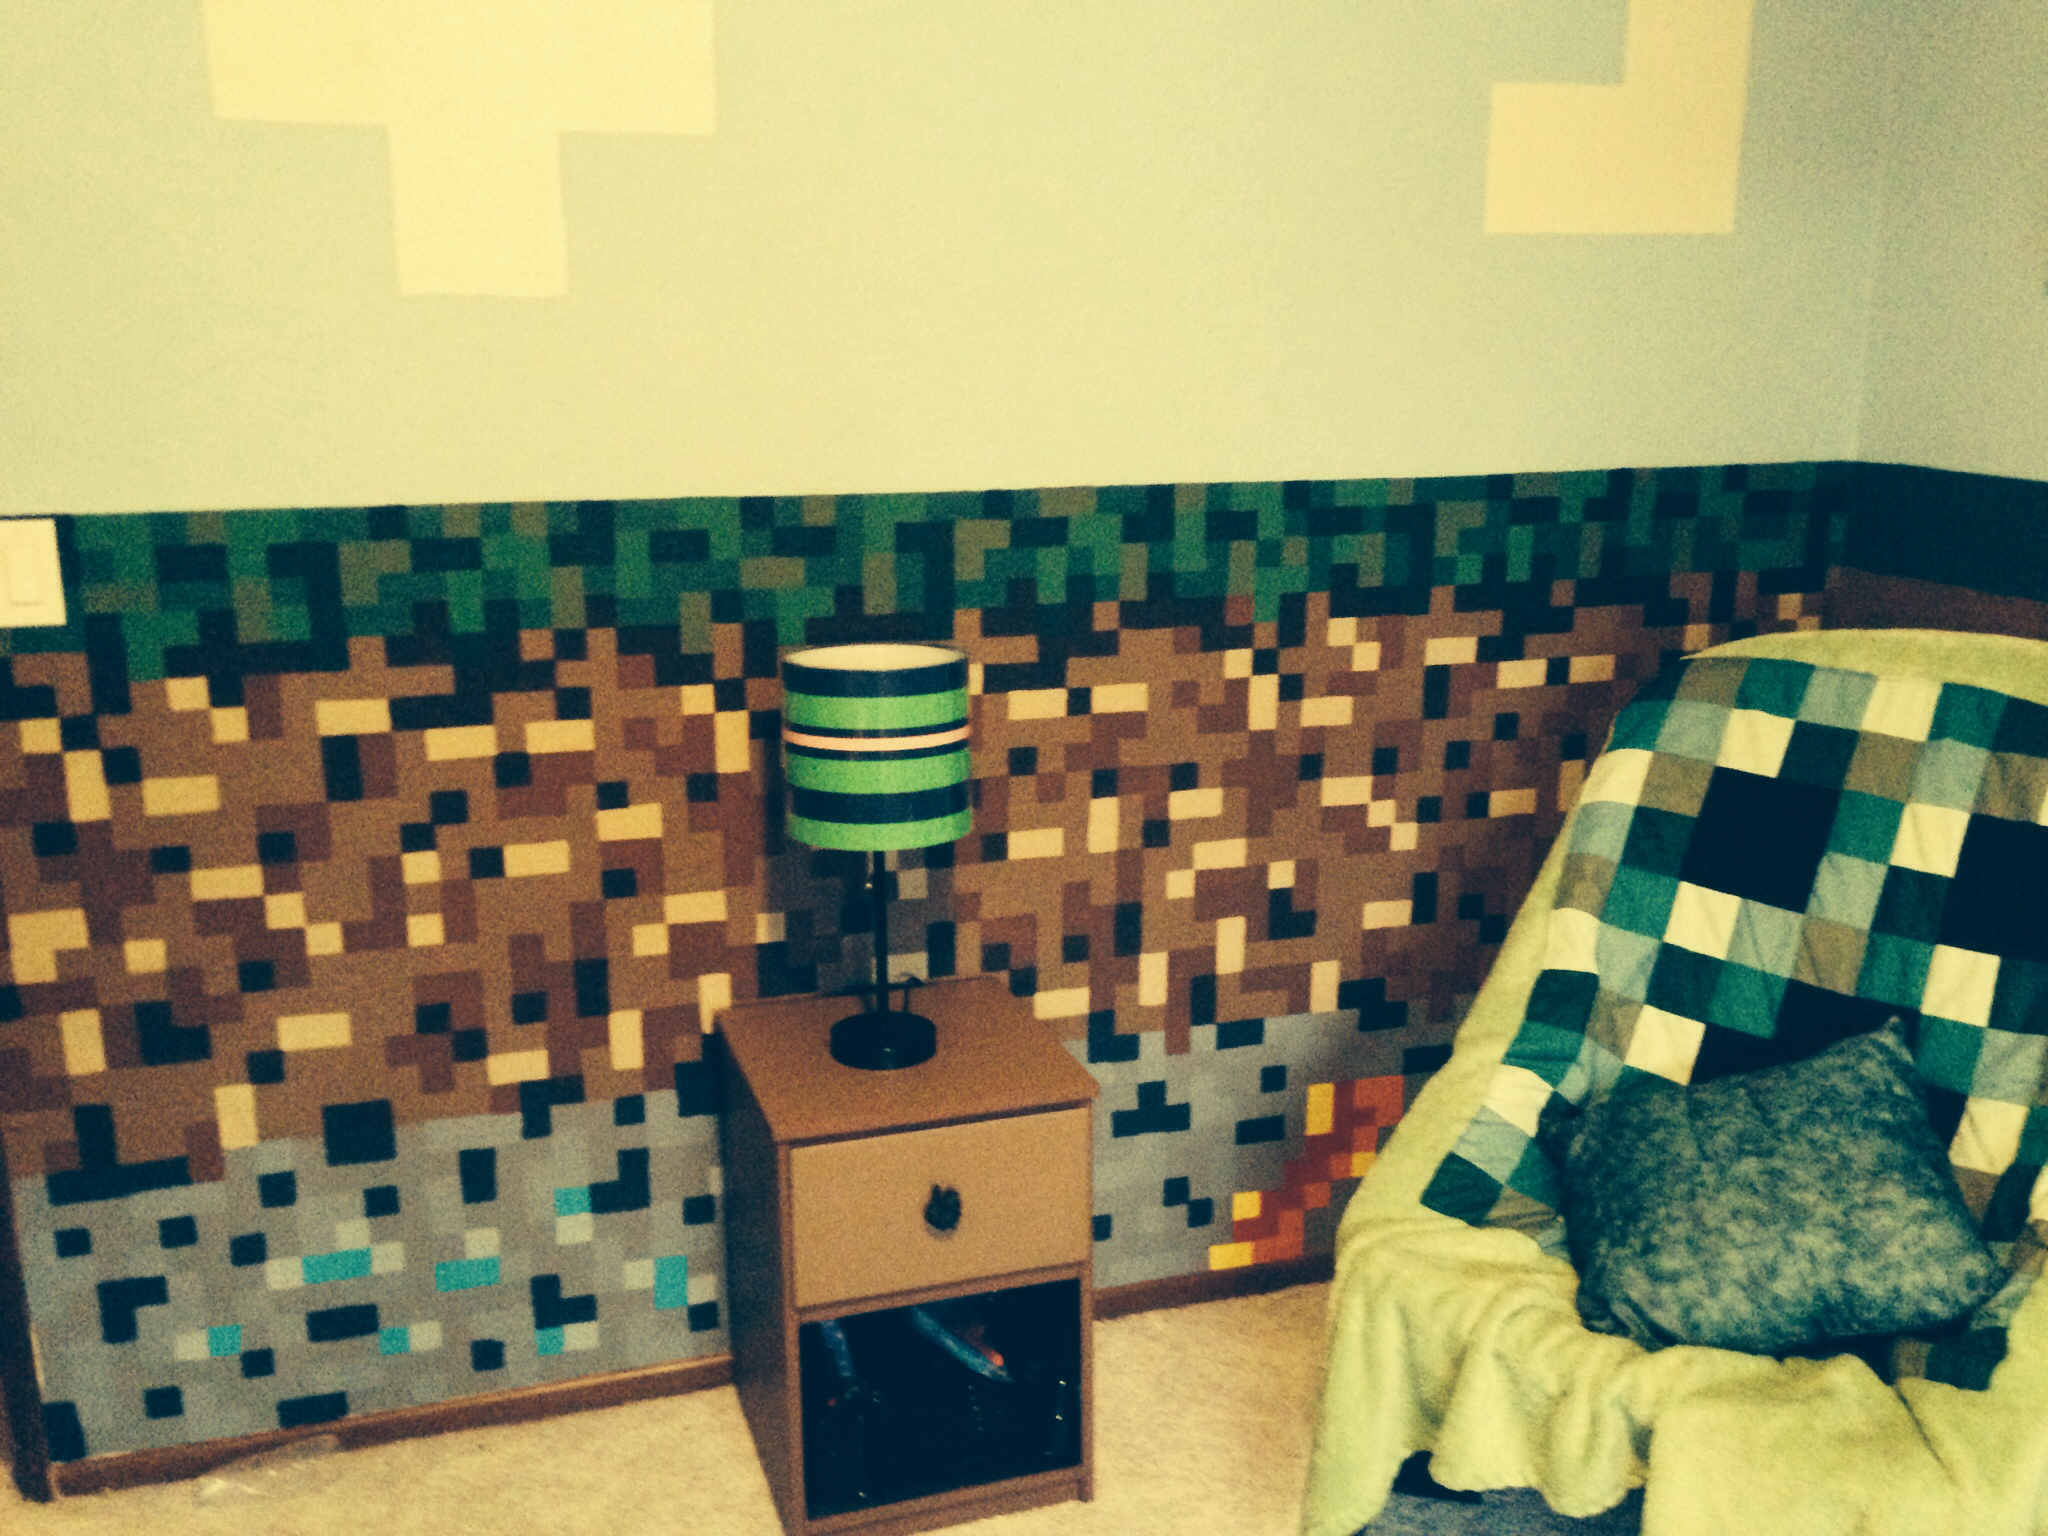 Minecraft Bedroom For My Year Old Son